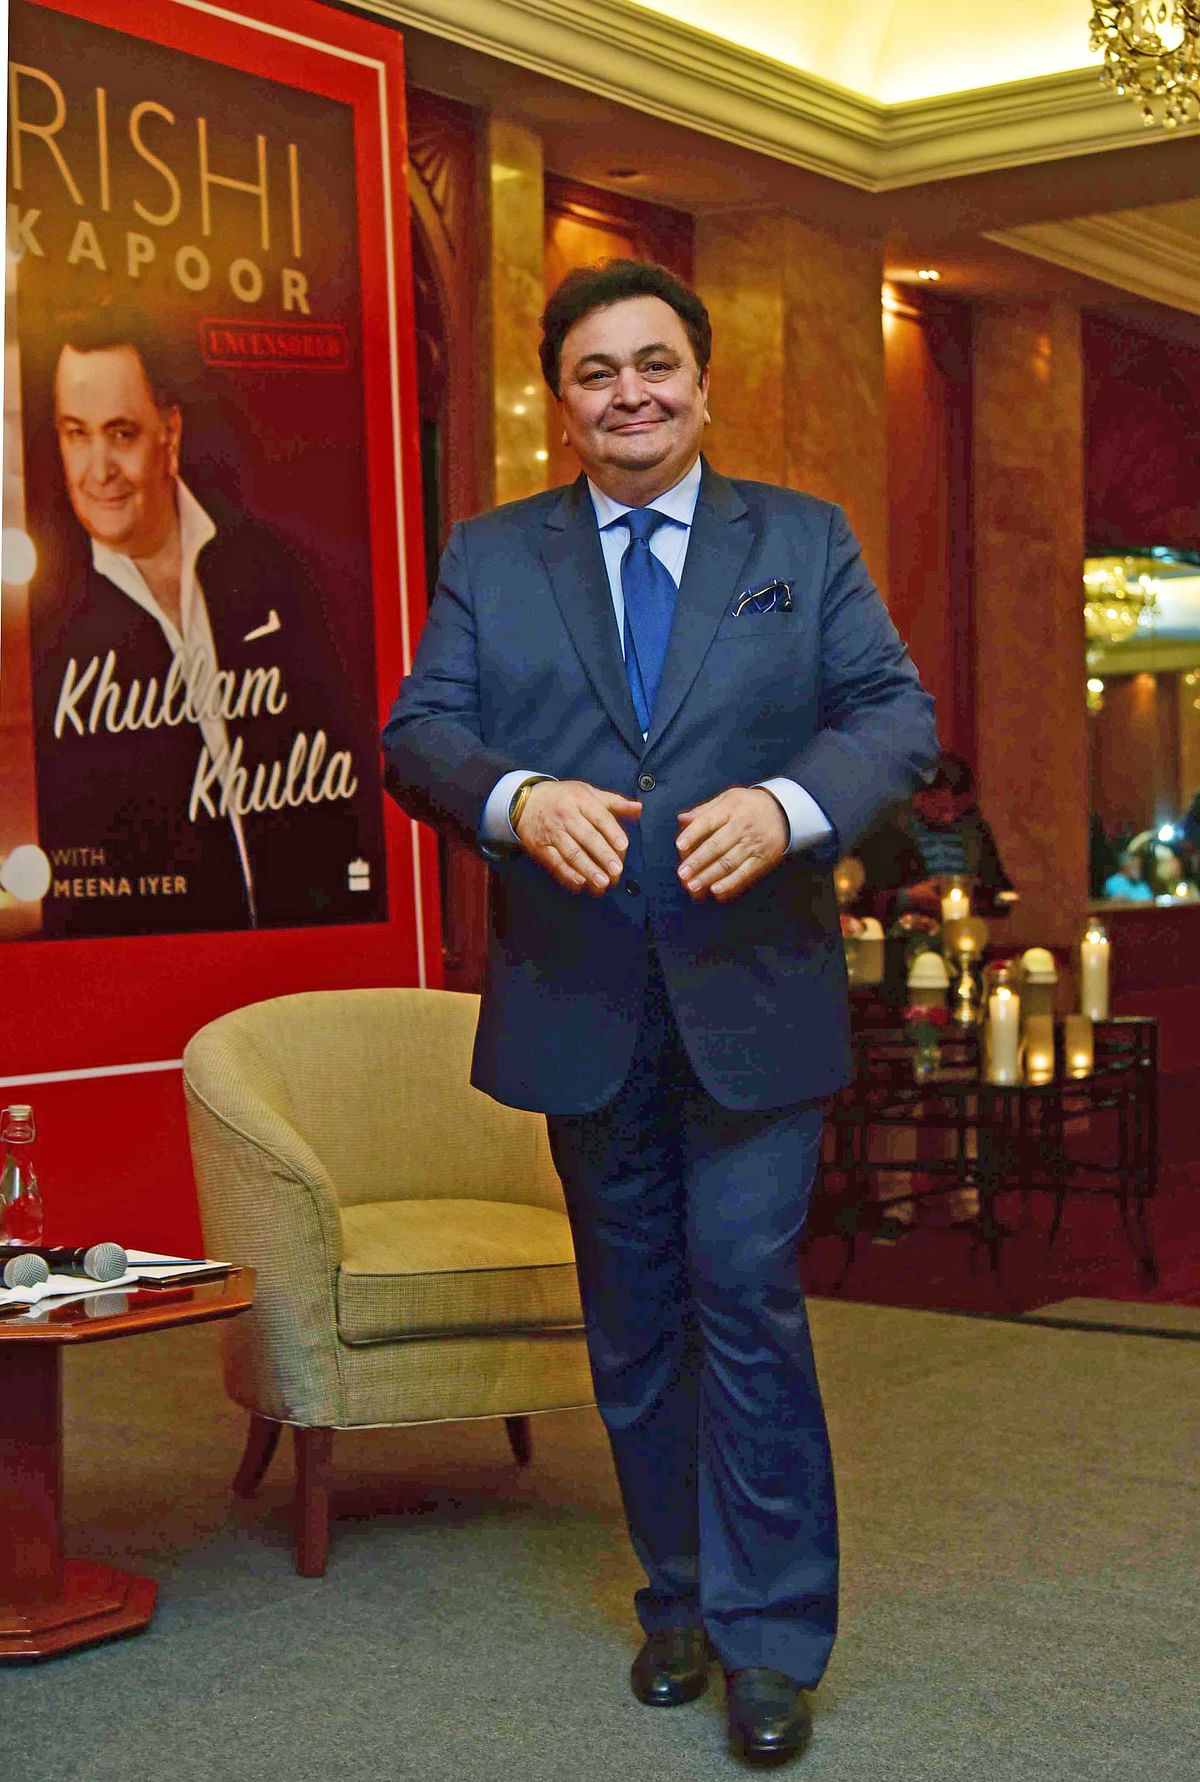 Not one to mince words, Rishi Kapoor has opened his heart in his autobiography, ‘Khullam Khulla’.